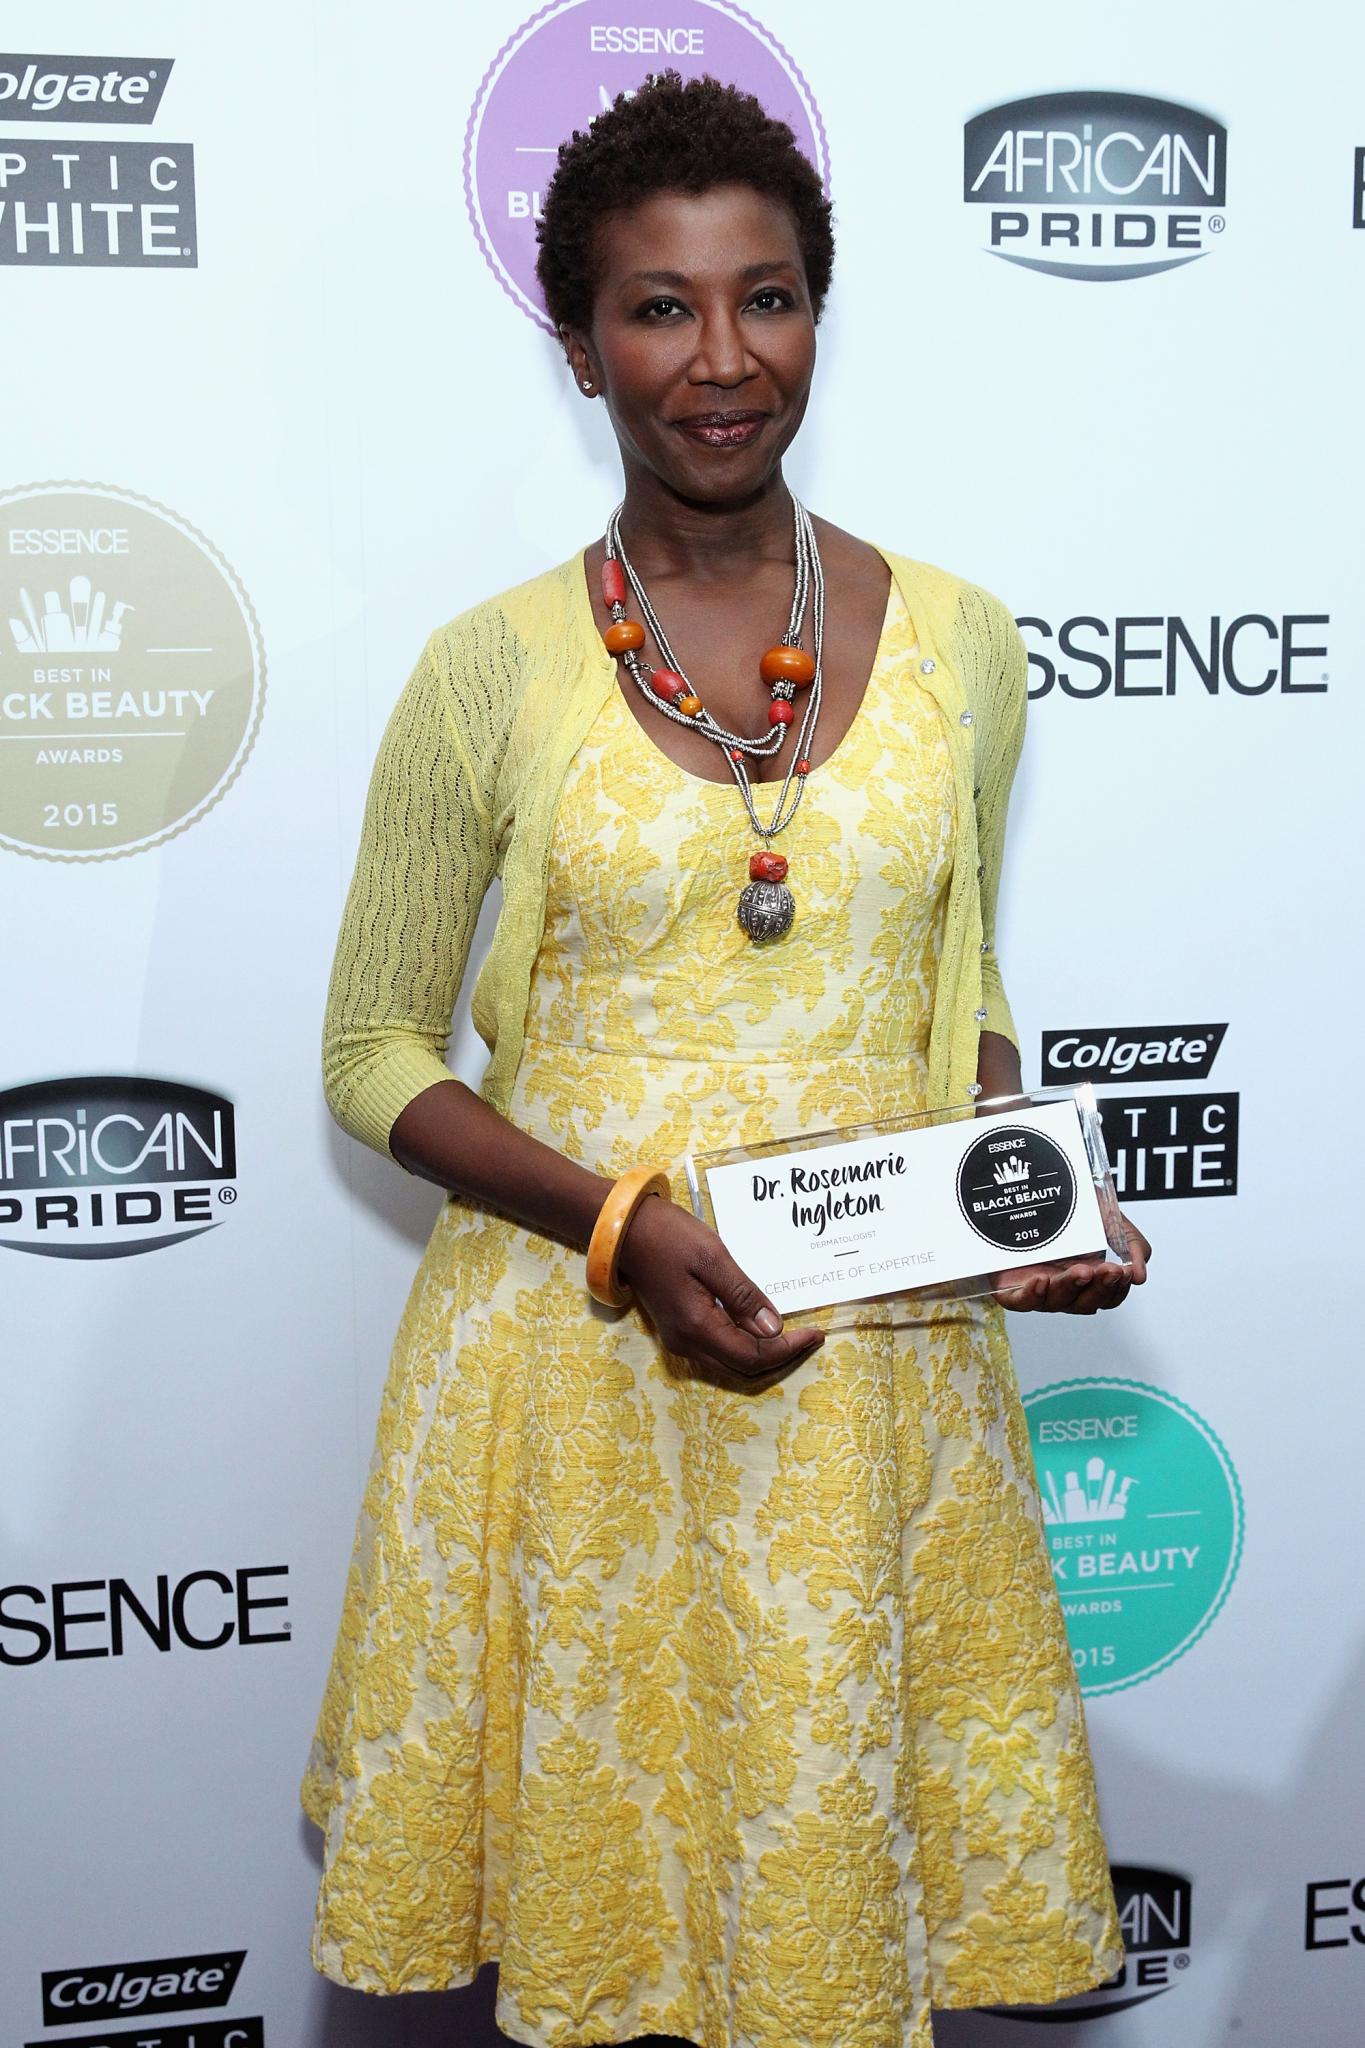 Red Carpet Looks From ESSENCE’s Best in Black Beauty Awards Event